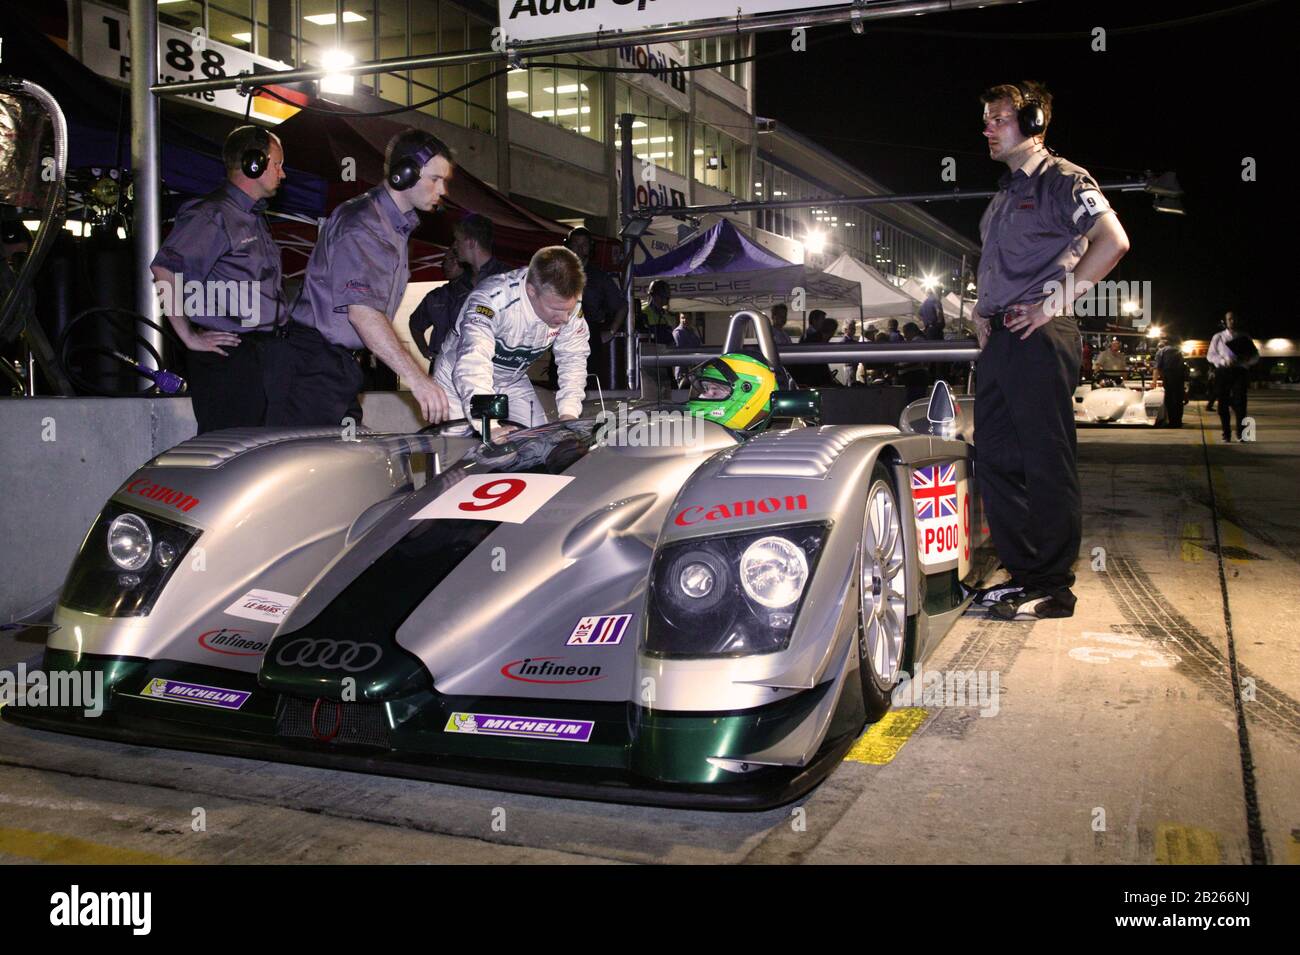 The Infineon Team Joest Audi R8 racing in the 2003 Sebring 12 hour race Stock Photo